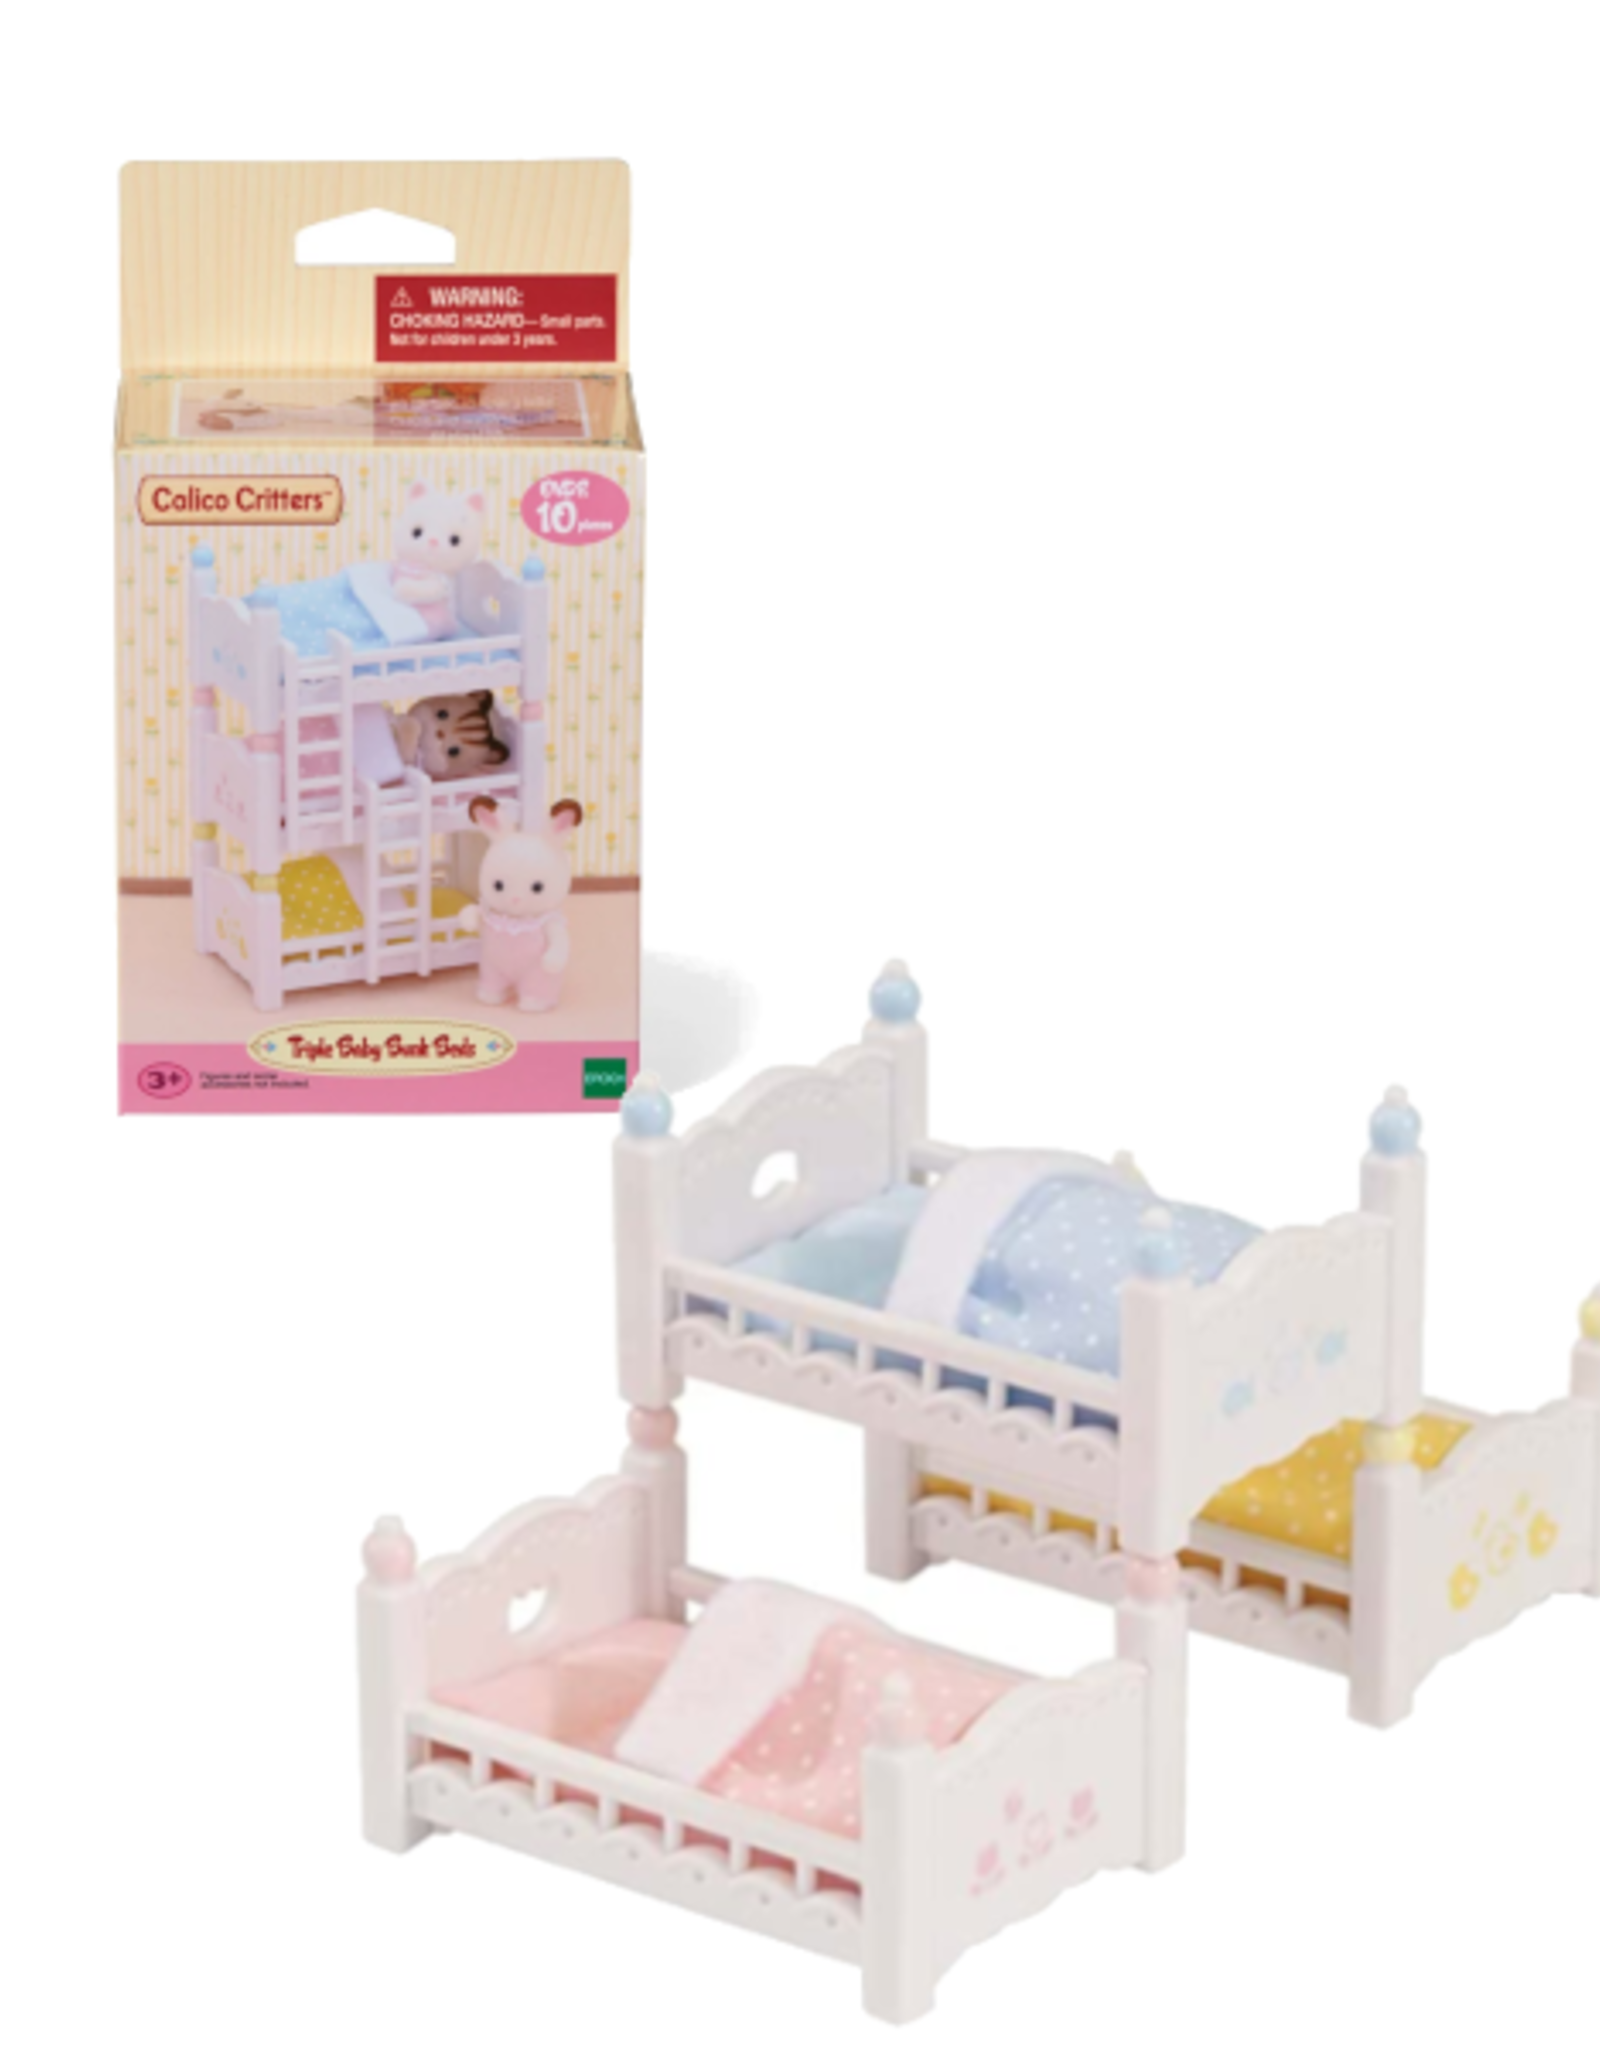 Calico Critters Triple Baby Bunk Beds Activity Toy For Kids Toddler Girls Gift 